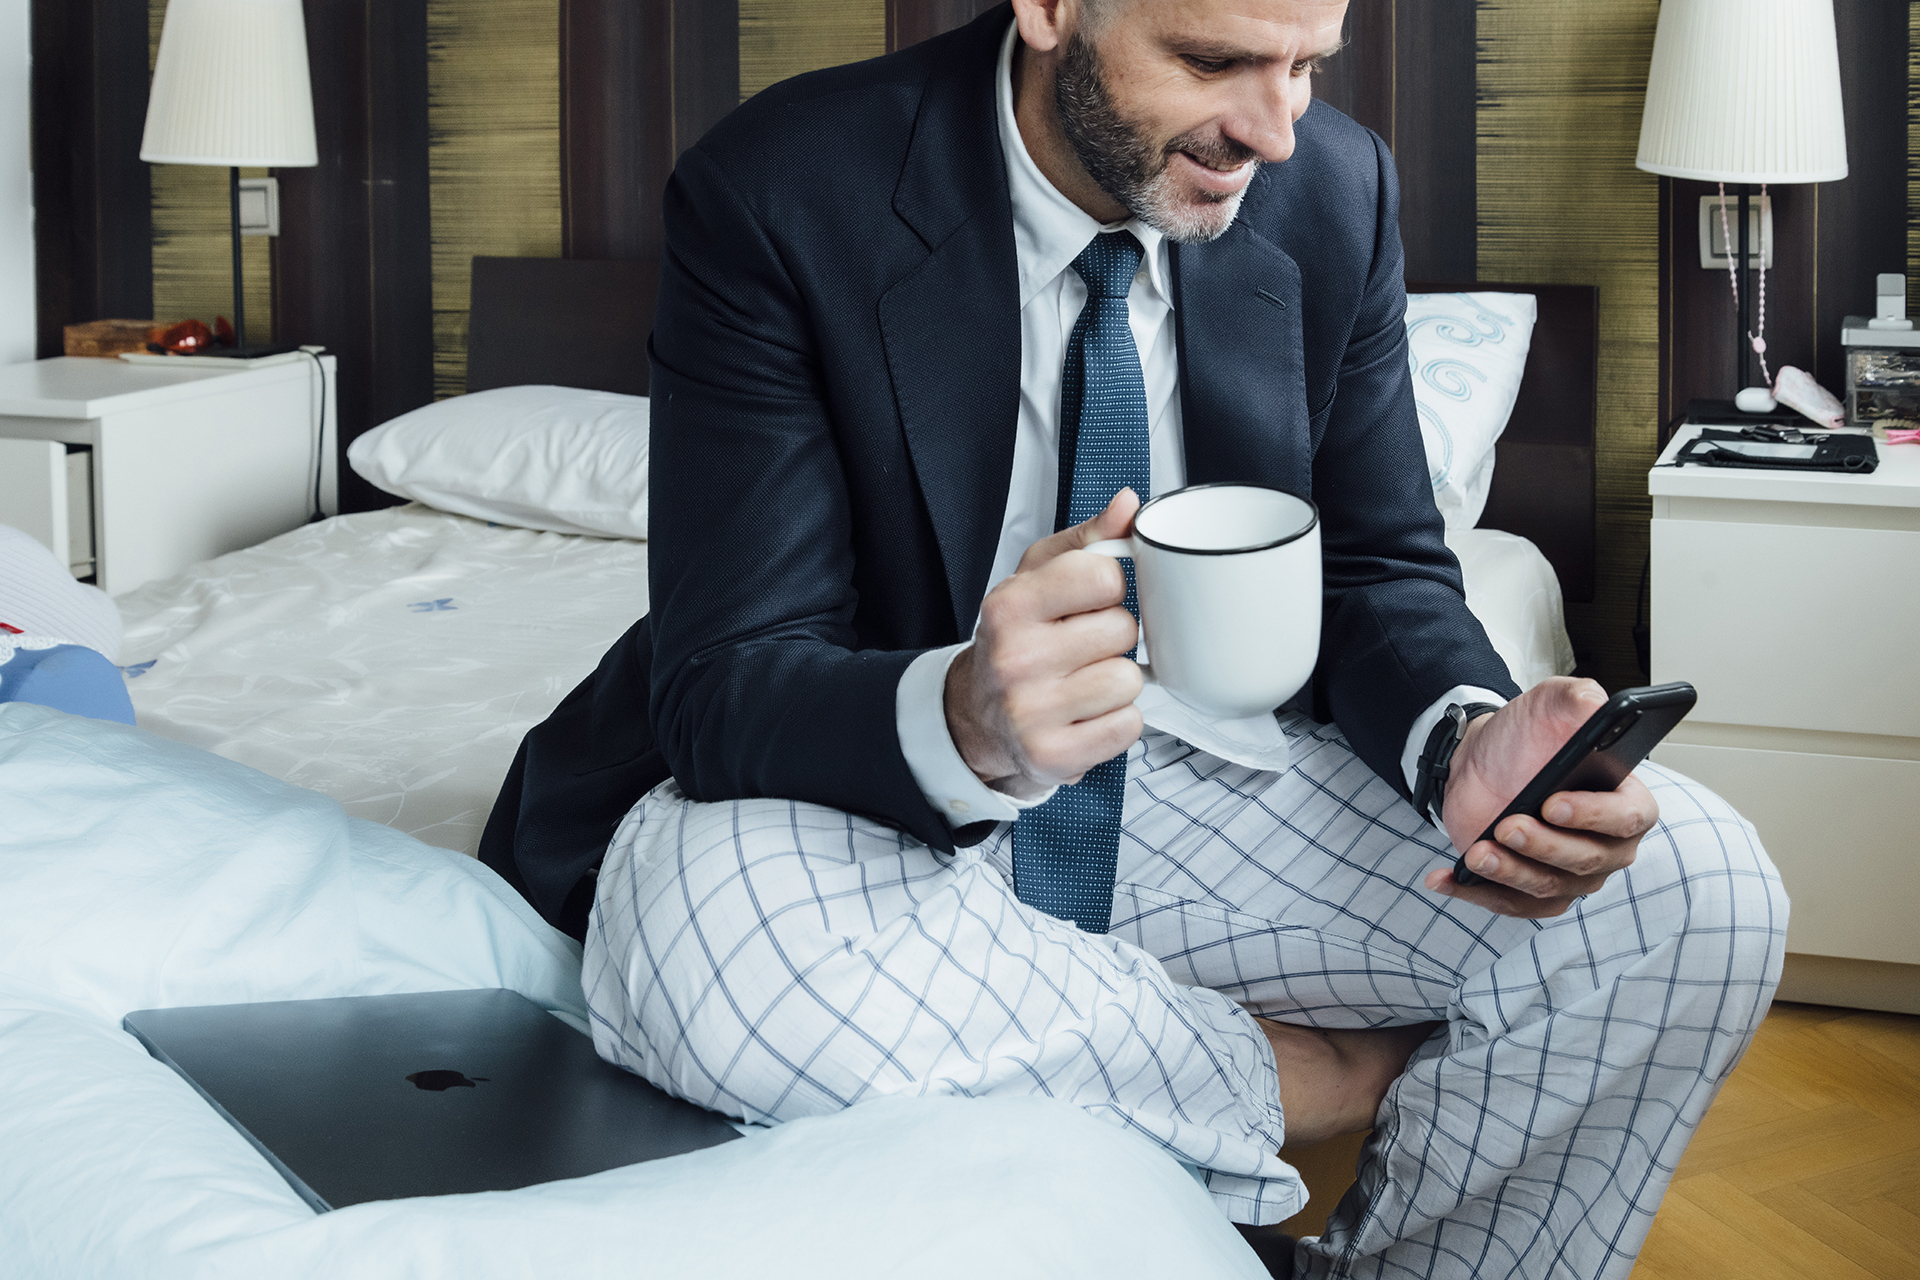 a man sitting on a bed holding a cup and cell phone